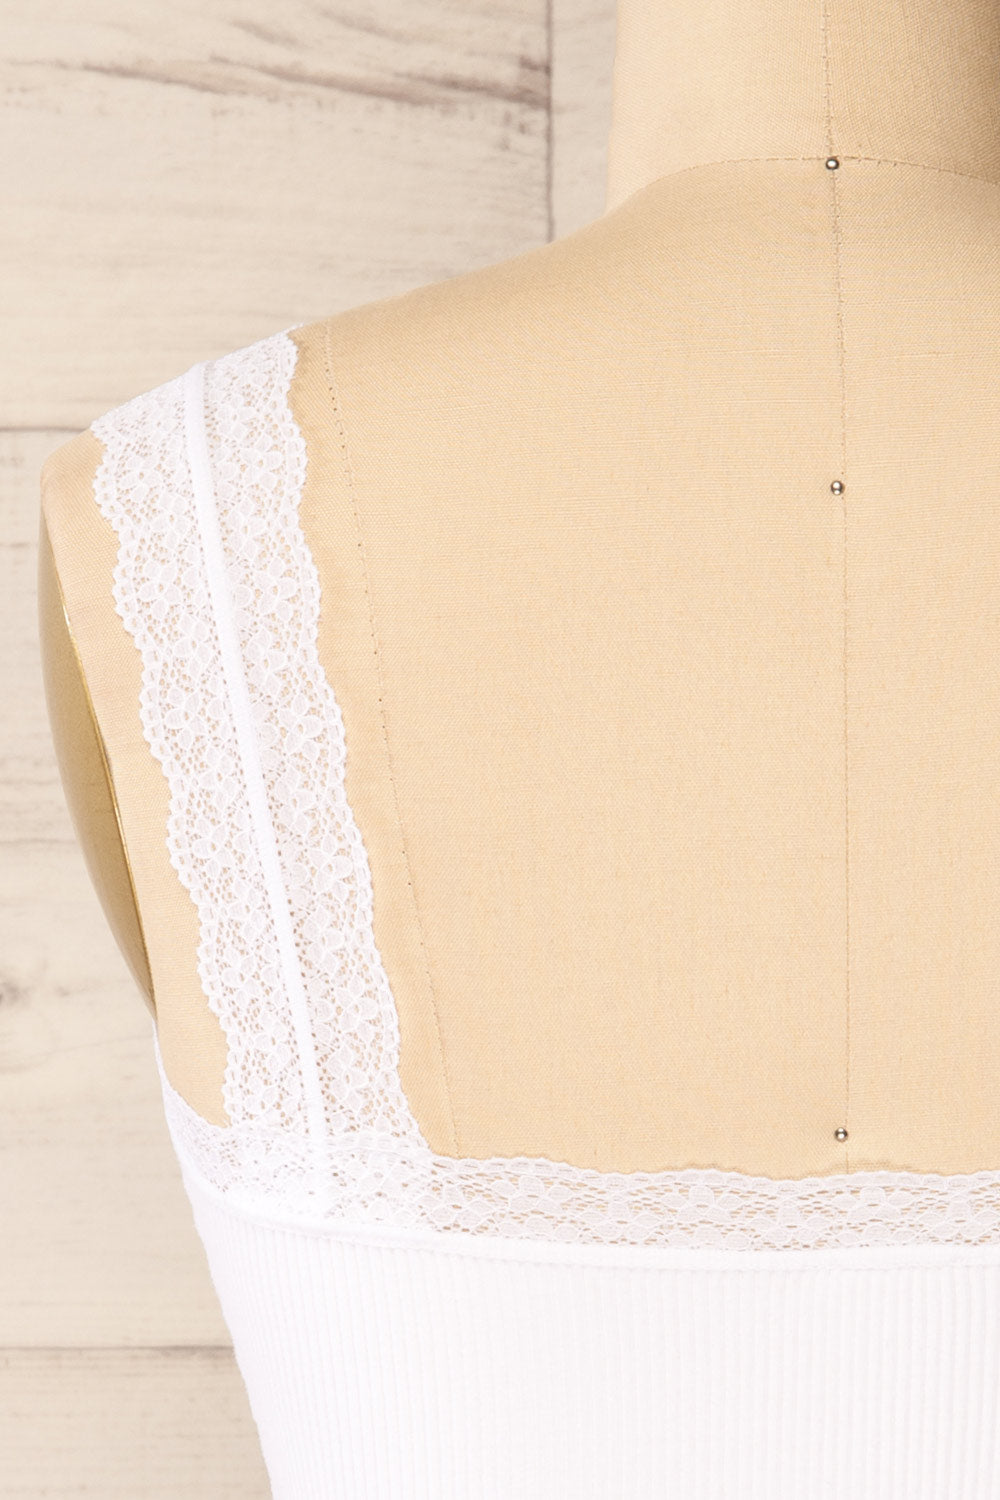 Somensac White Ribbed Camisole w/ Lace Trim | Boutique 1861 back close-up